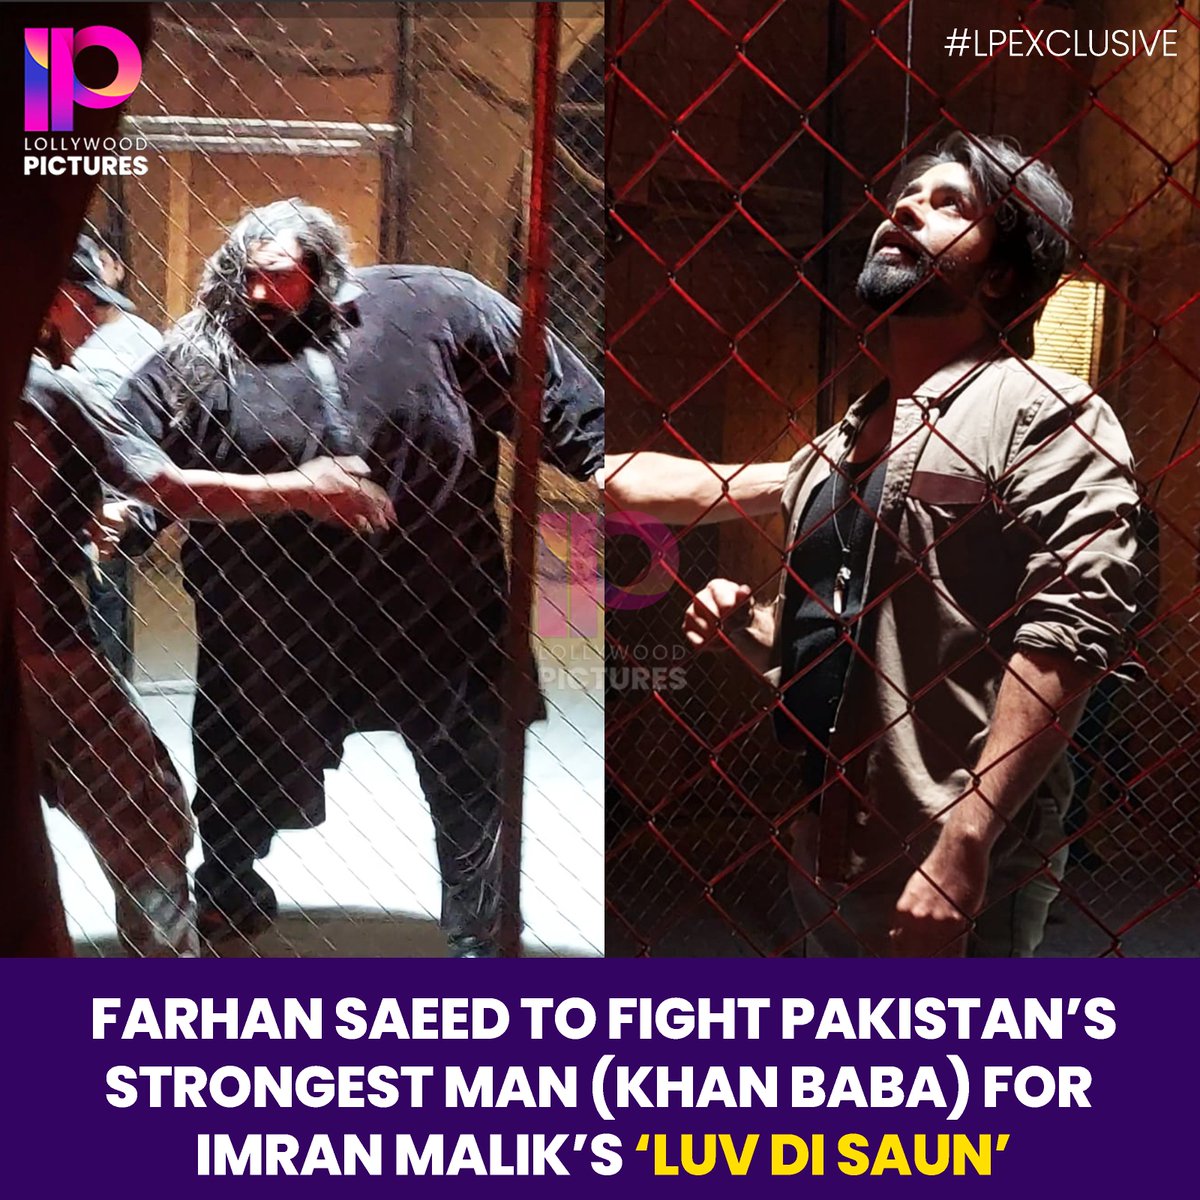 #Exclusive #FarhanSaeed stars in Imran Malik's #LuvDiSaun and will face Pakistan's strongest man, Khan Baba, in a hand-to-hand fight sequence - a first for Pakistani Cinema! Behind-the-scenes images have us hyped! Directed by Imran Malik, releasing worldwide soon 🔥🎬